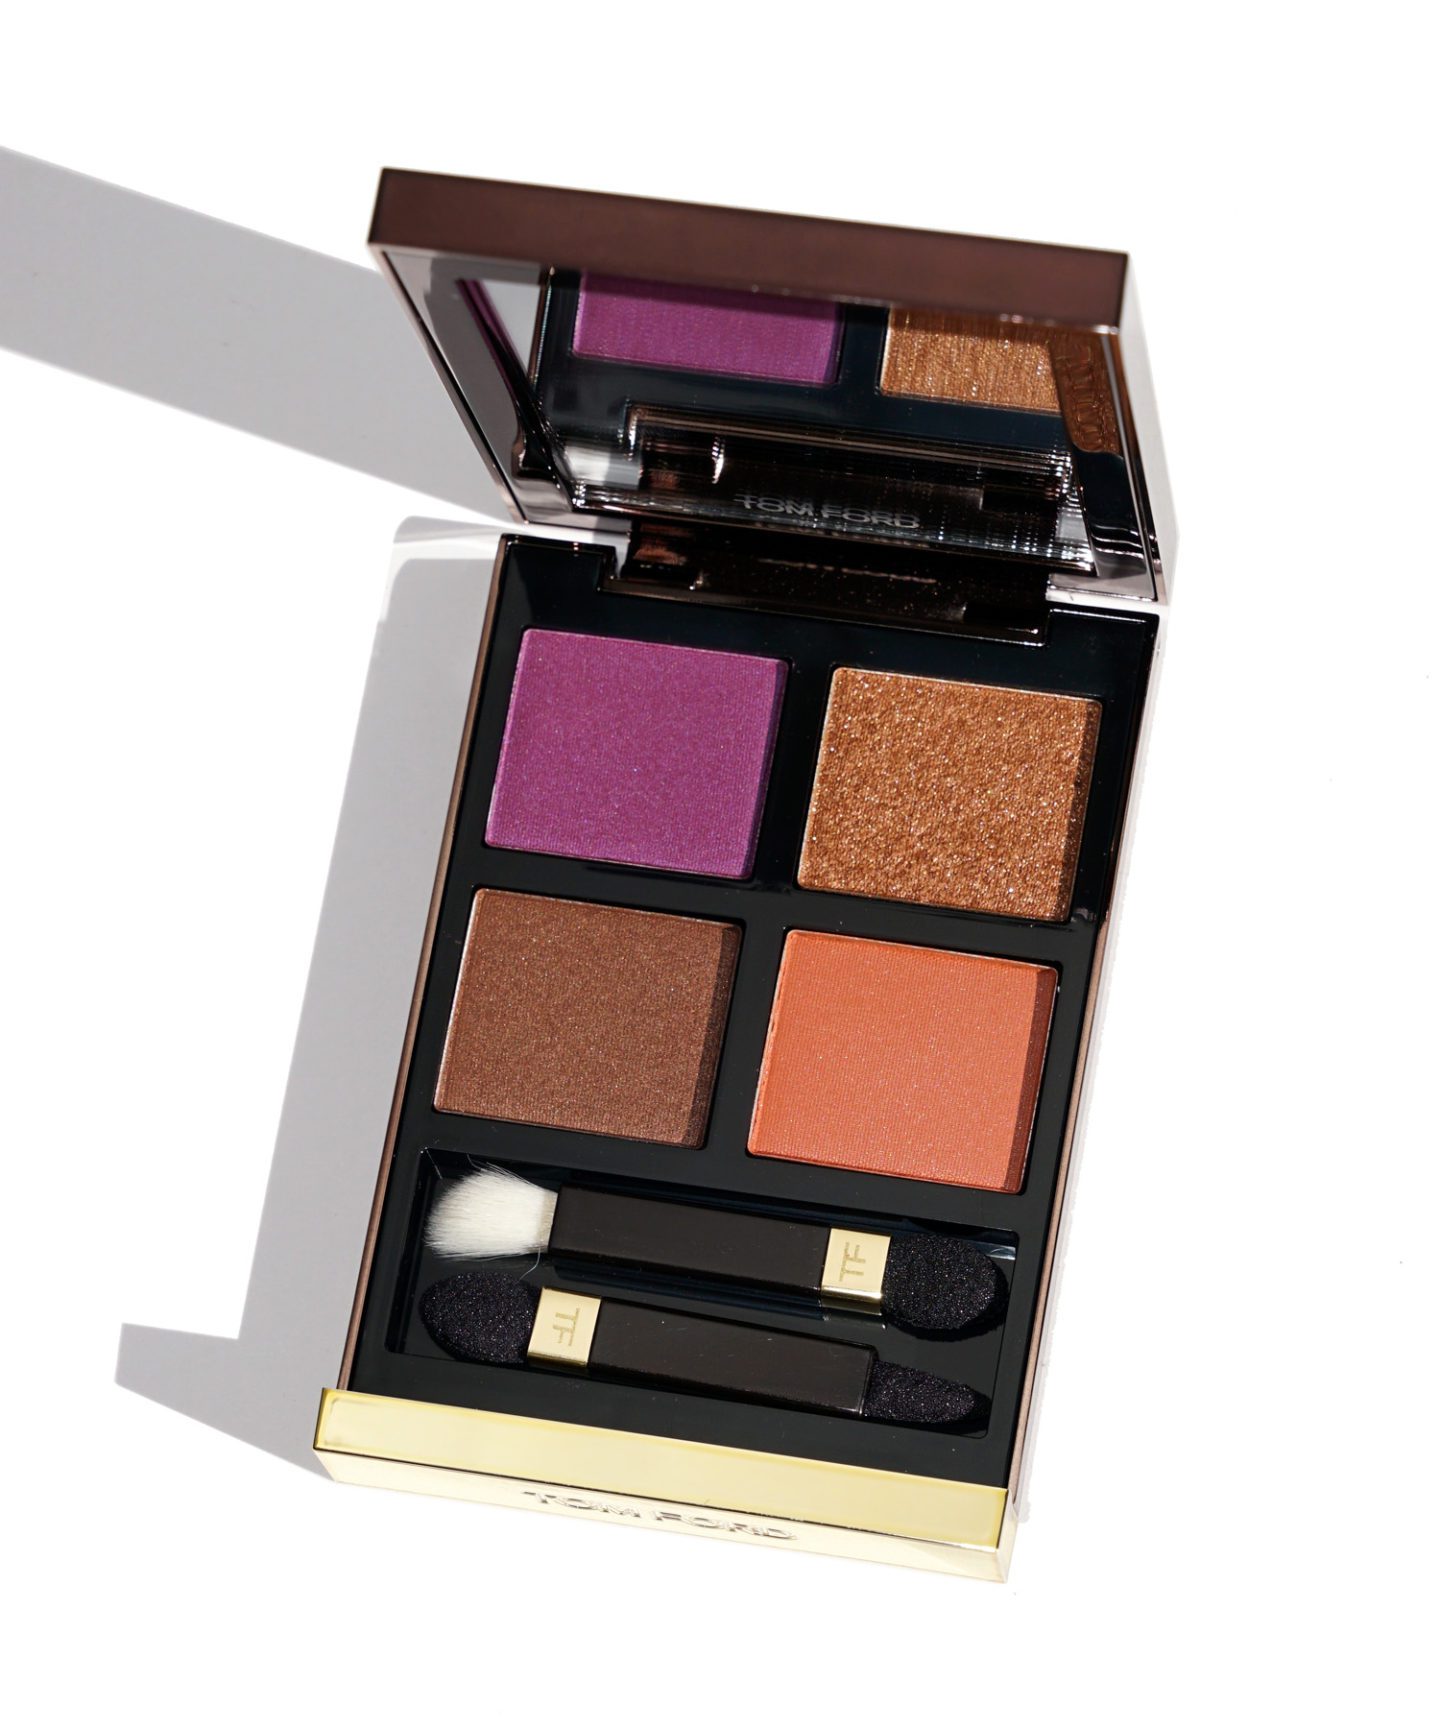 Tom Ford African Violet Eyeshadow Quad Review | The Beauty Look Book